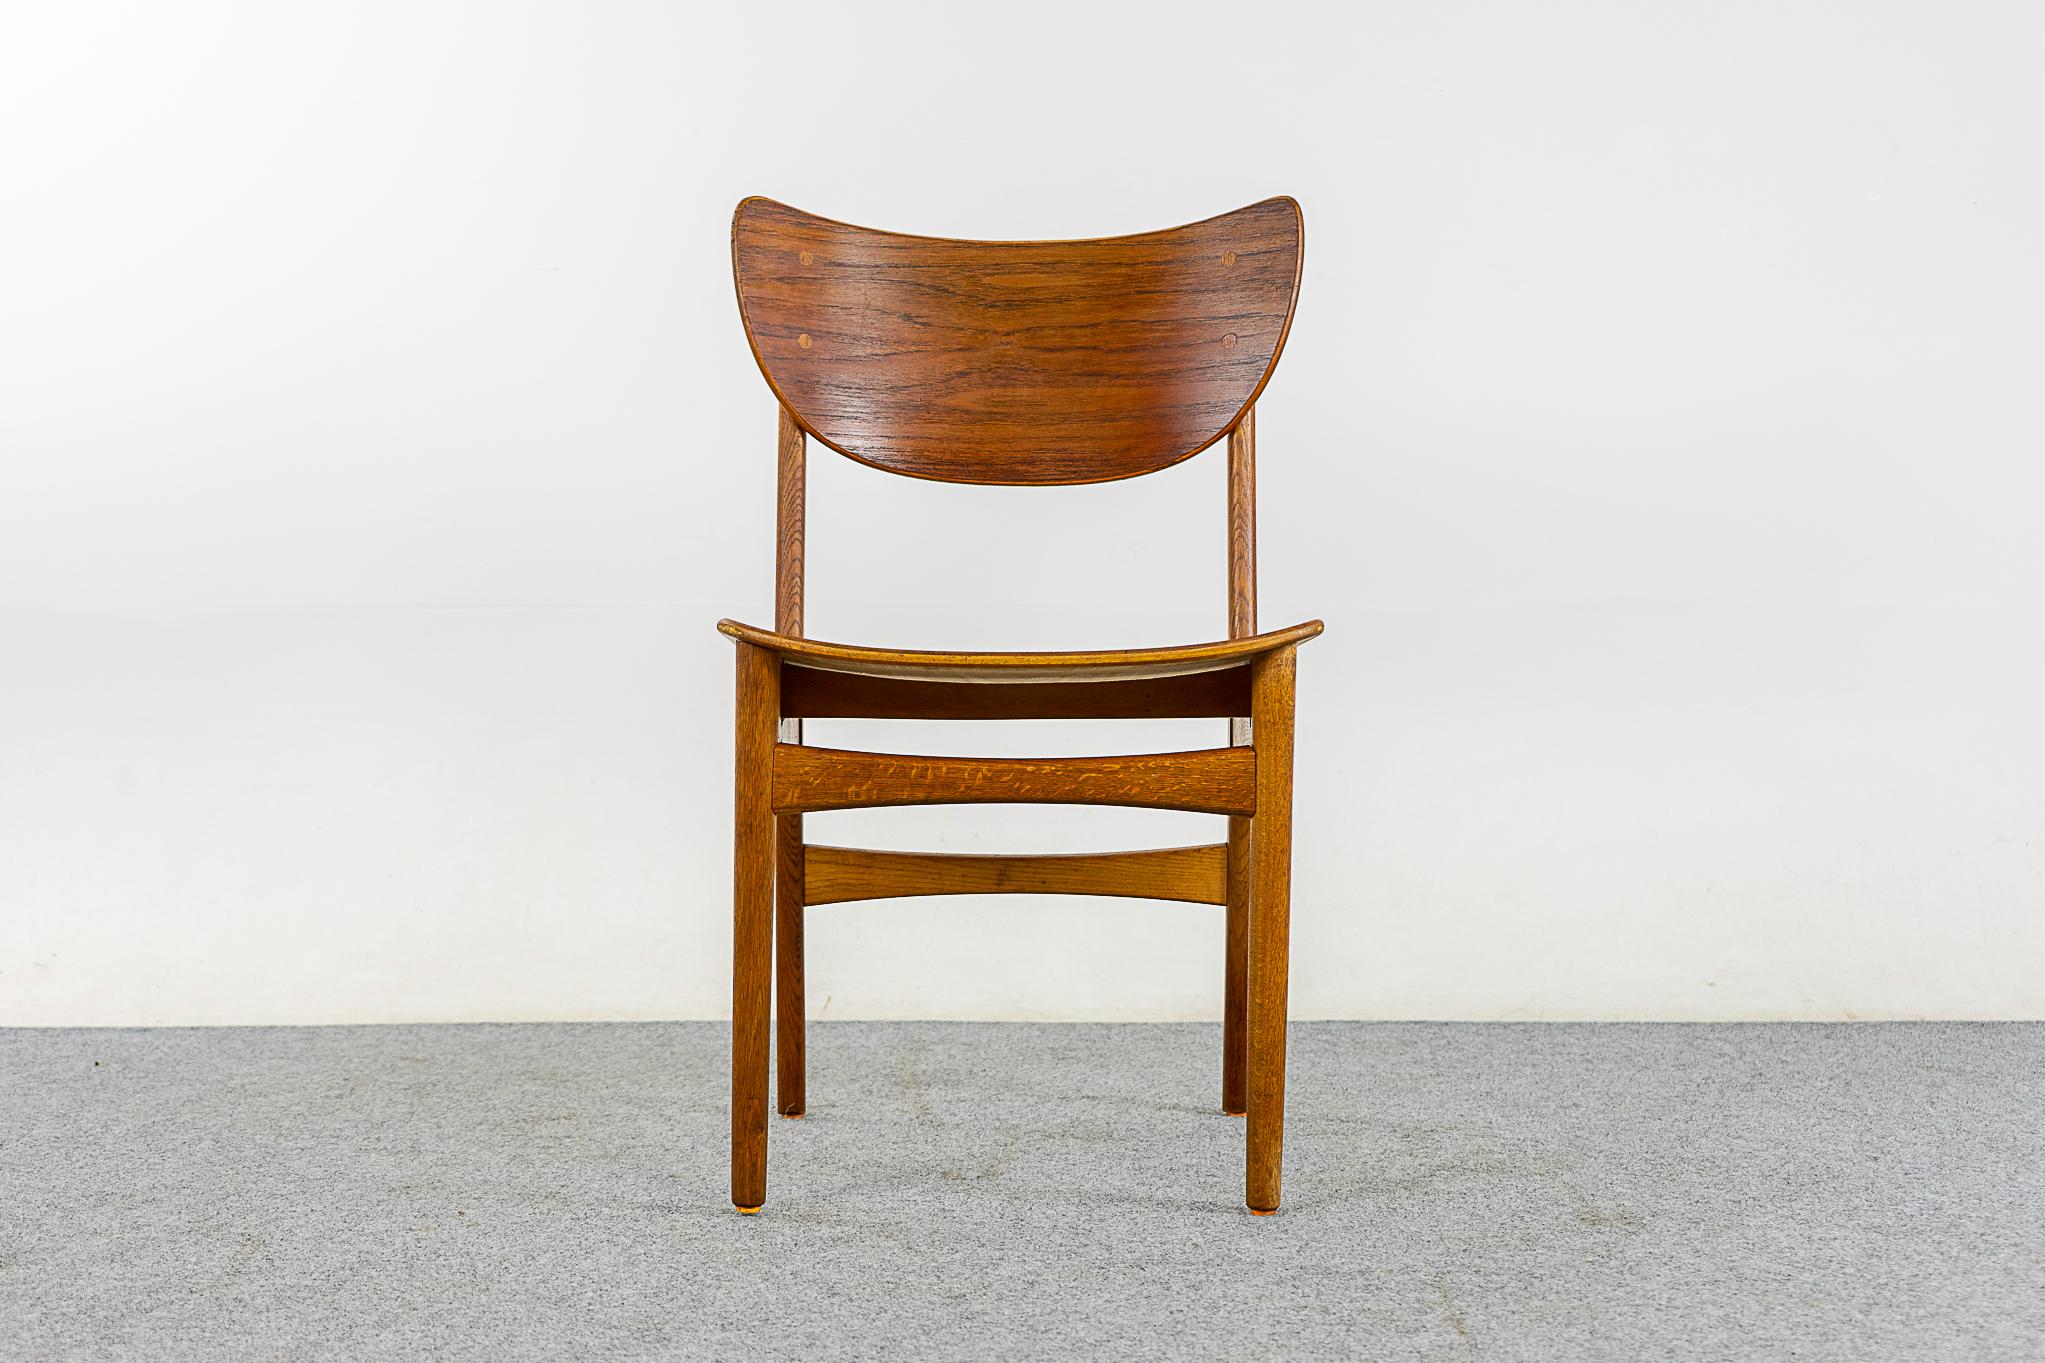 Teak & oak Danish chair, circa 1960's. Beautifully curved teak backrests and generous seat provides support and comfort. Solid oak legs with cross braces, for added stability!